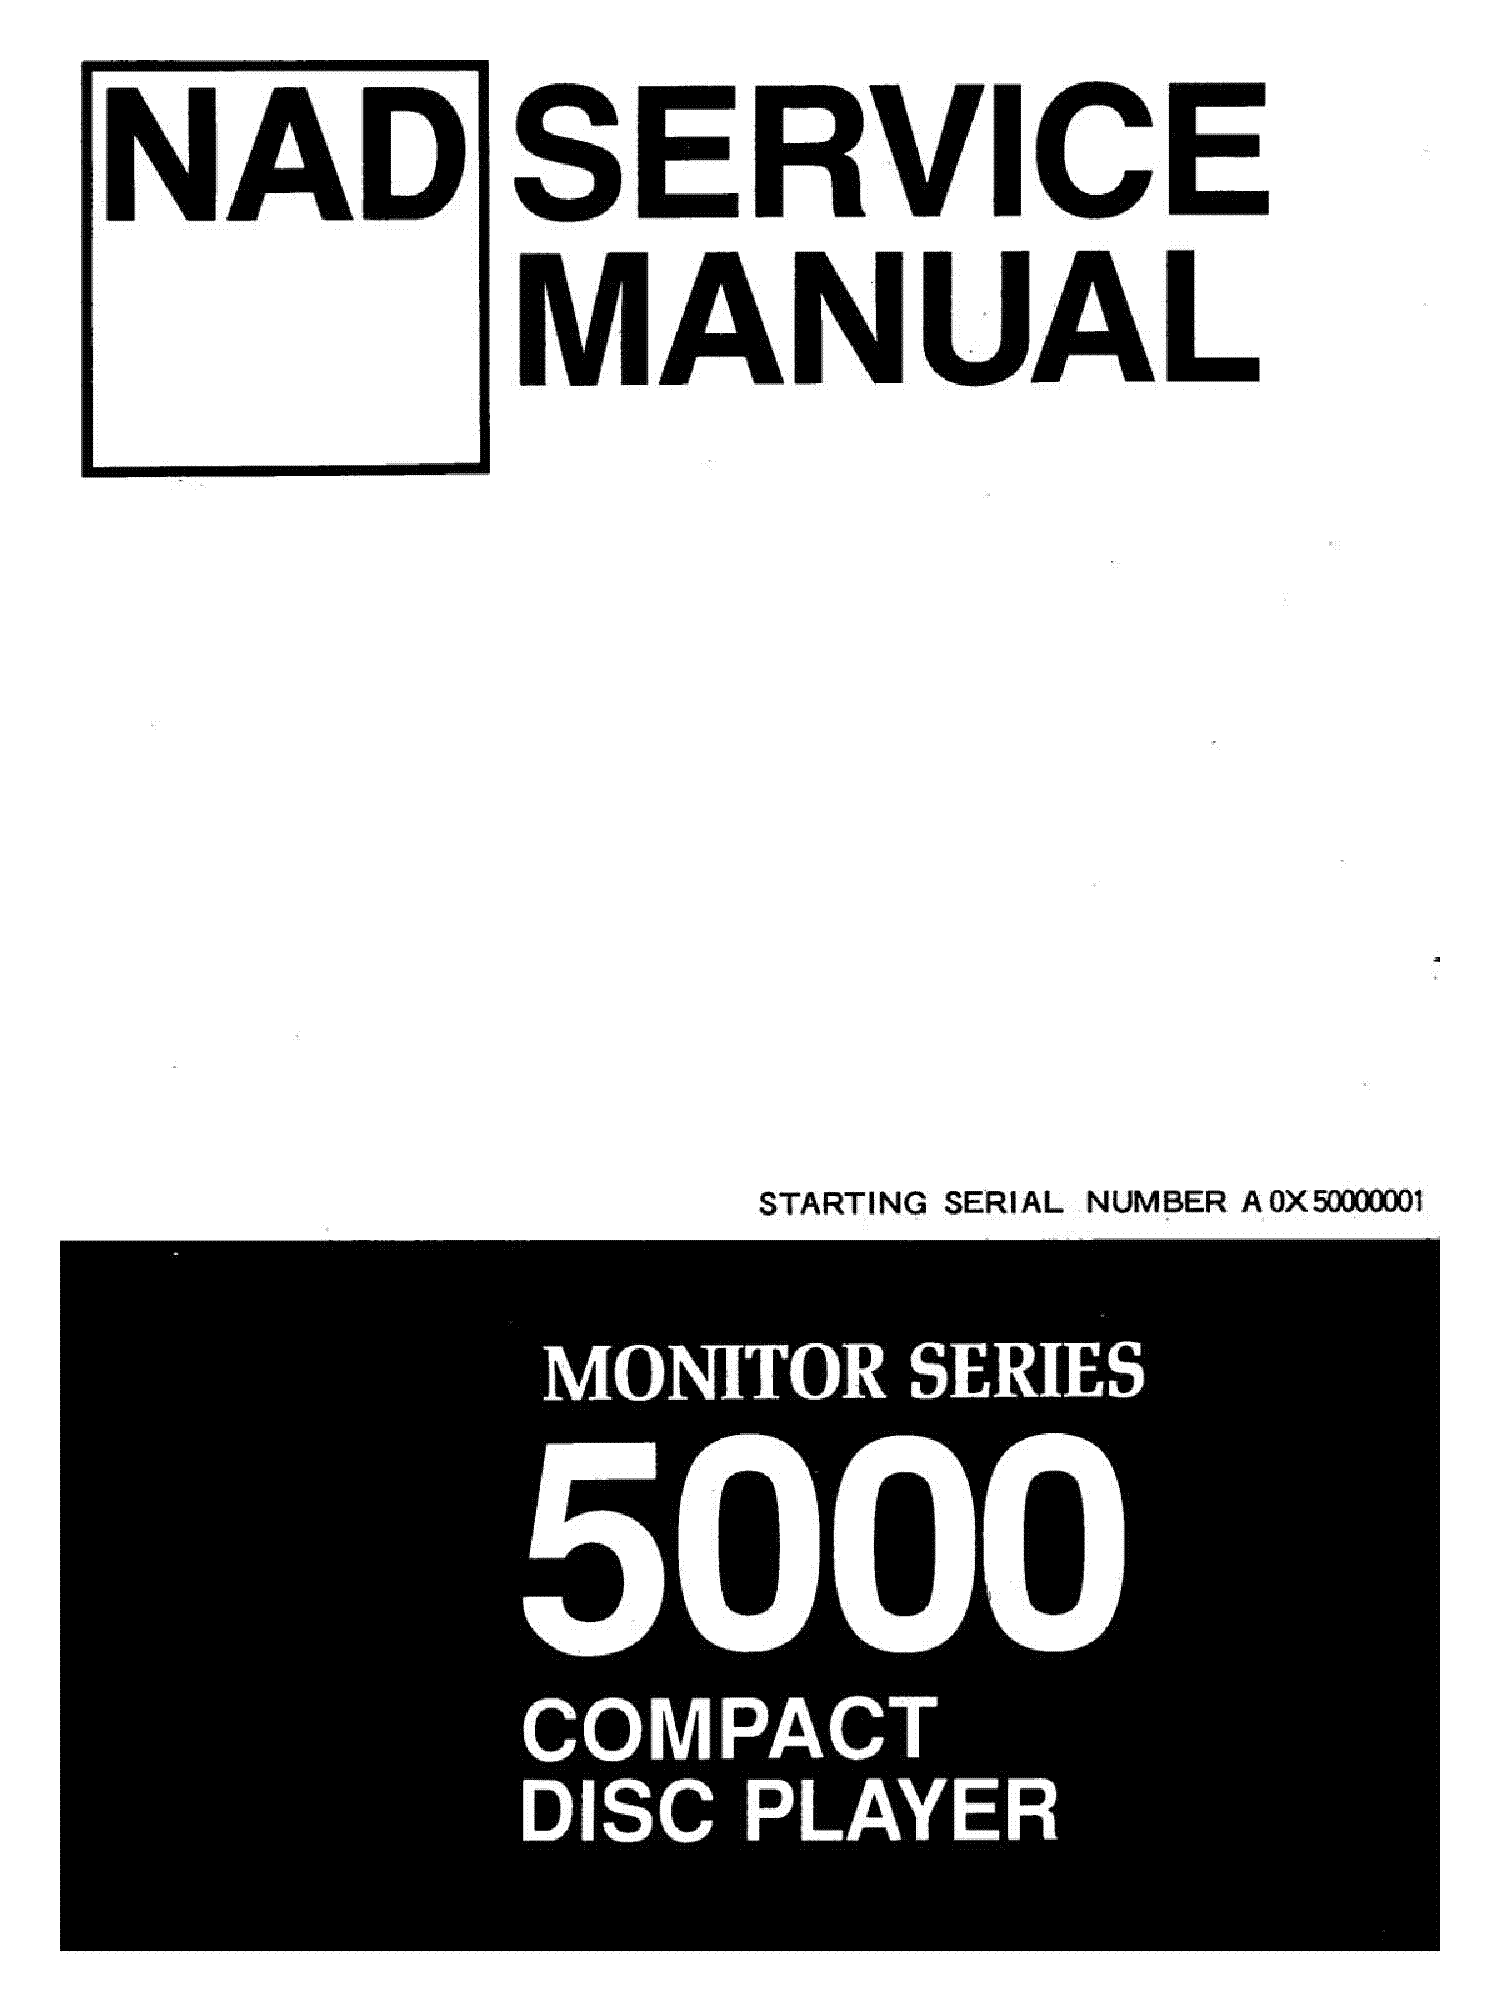 NAD CD-5000 service manual (1st page)